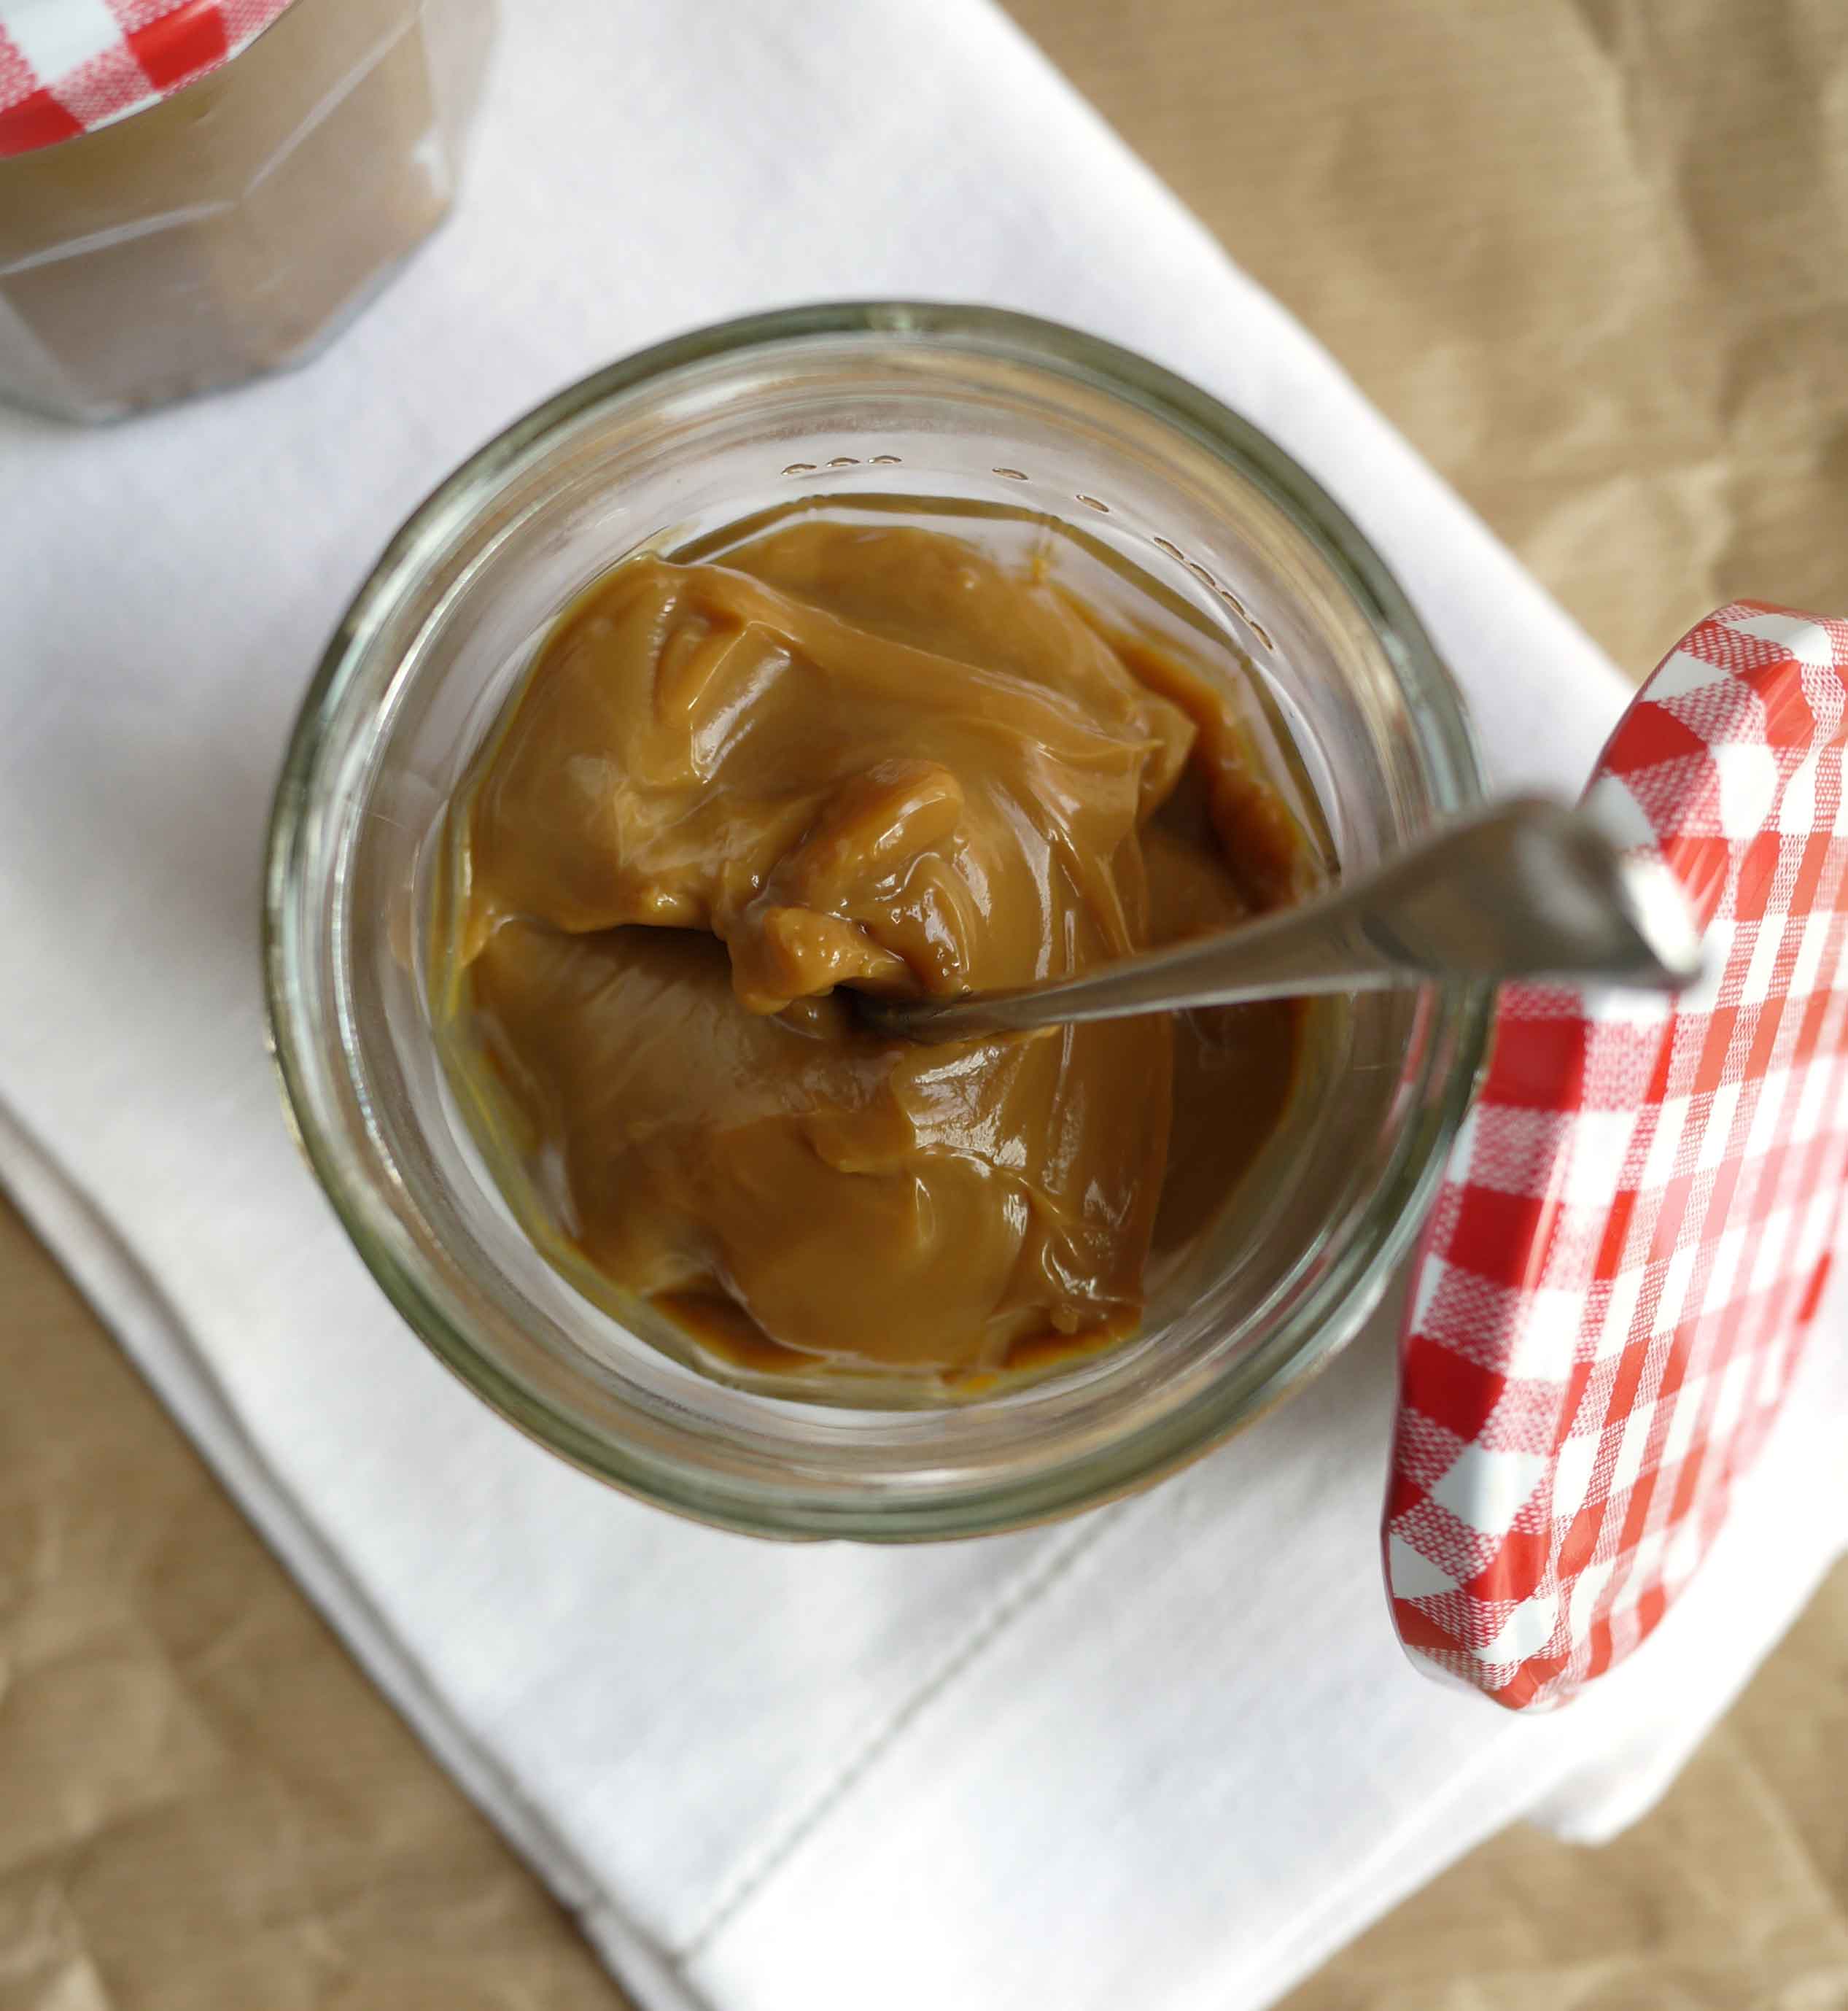 The easiest ever slow cooker (crockpot) home made condensed milk caramel sauce, made without cream or fuss. Perfectly smooth, not grainy, slow cooker caramel!